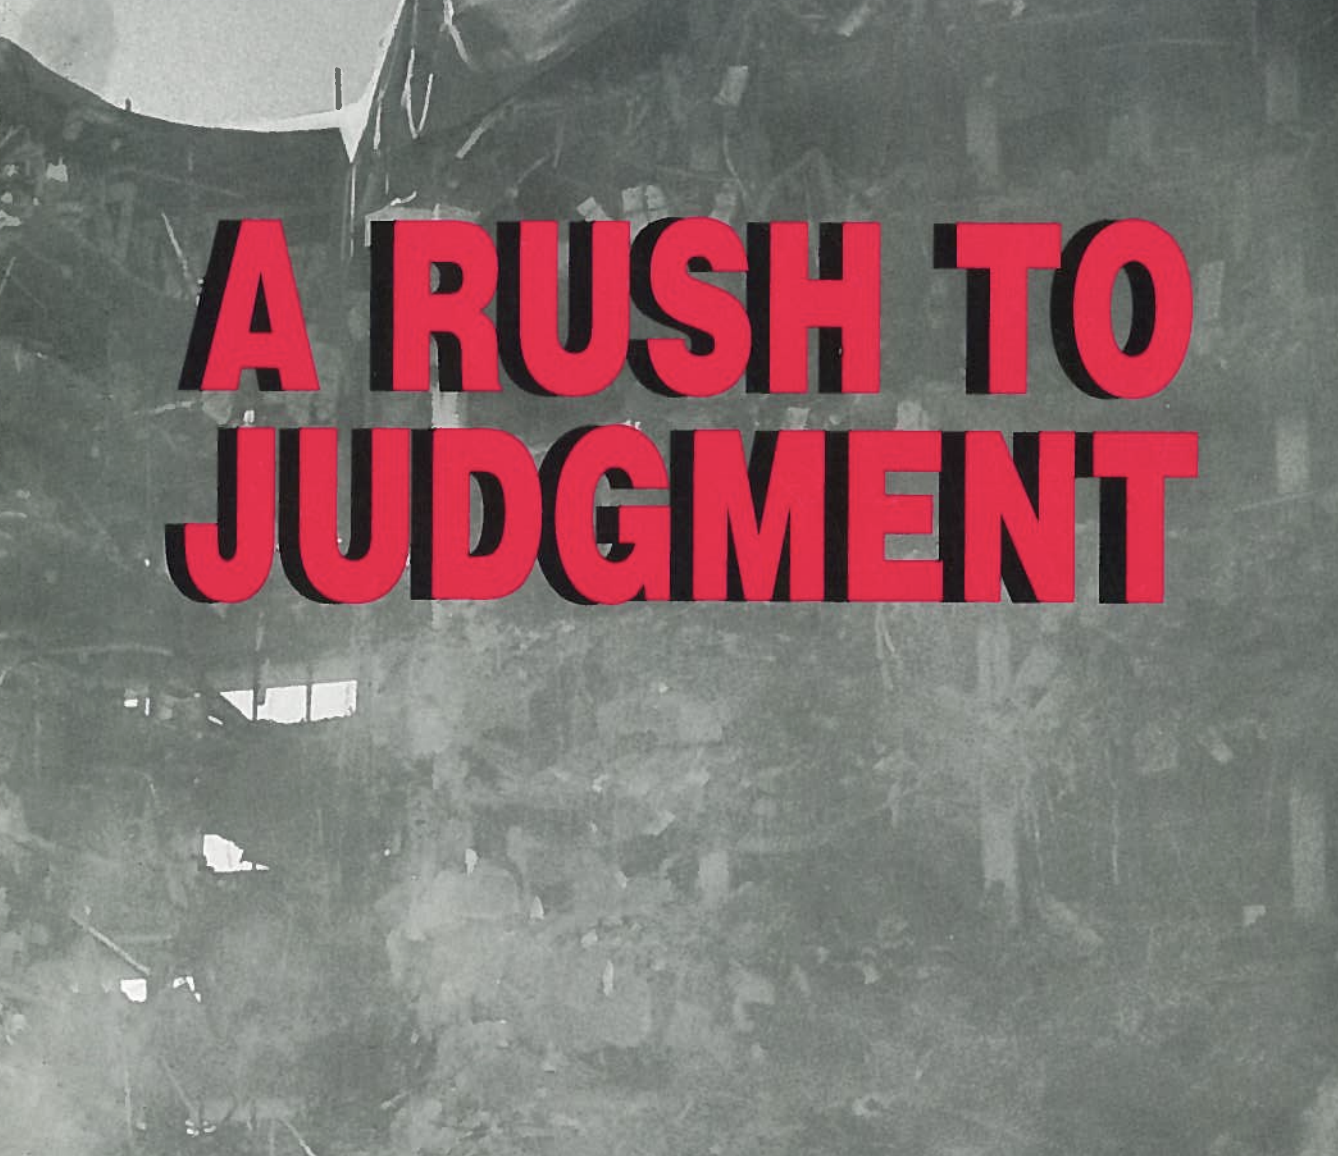 A RUSH TO JUDGEMENT